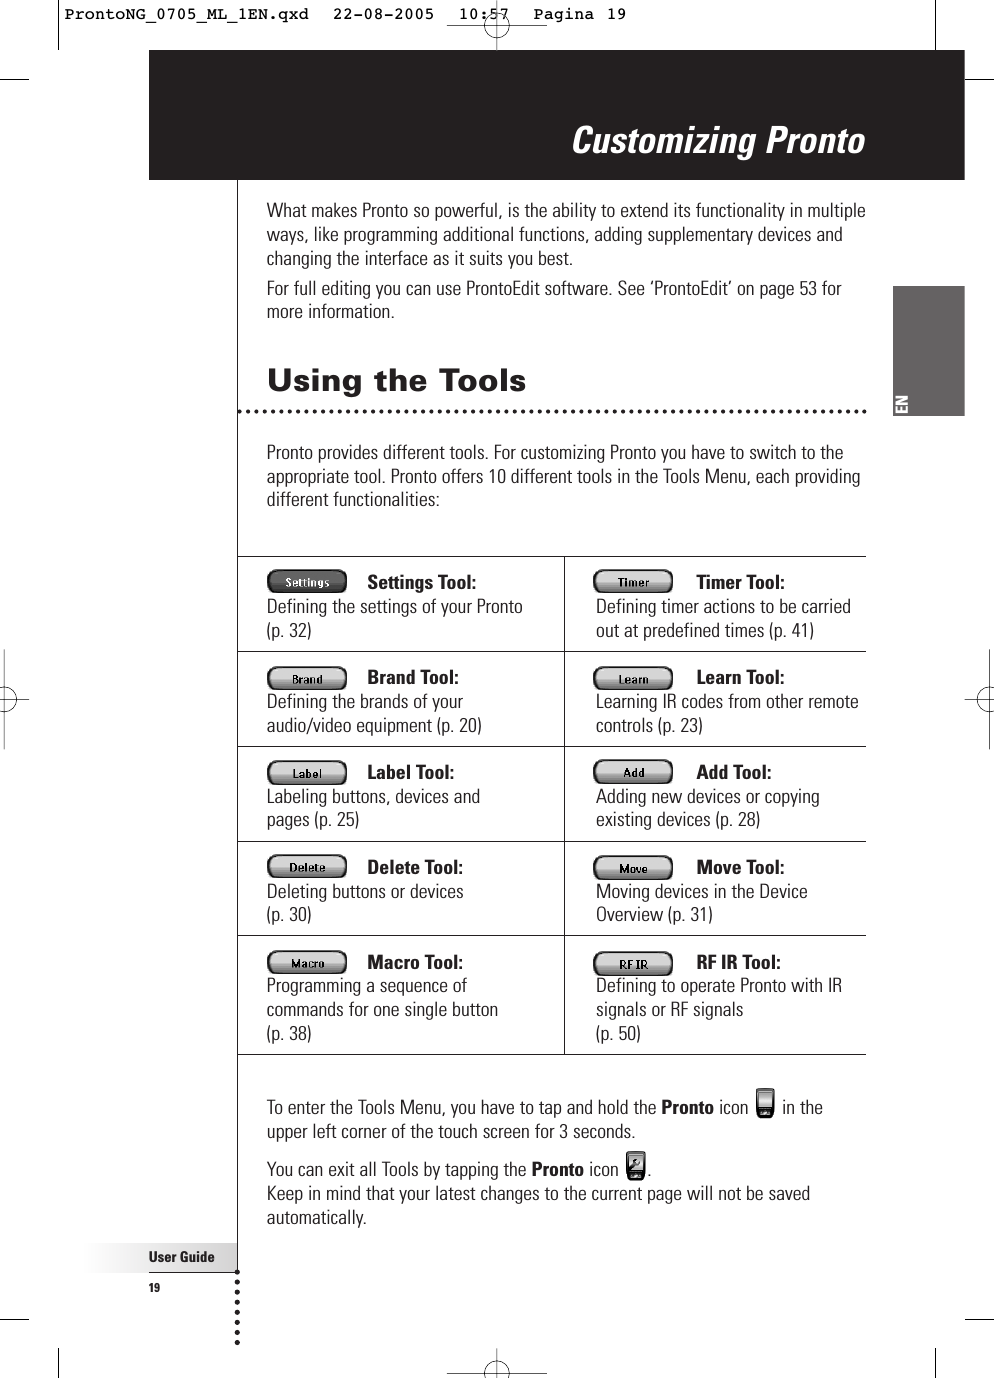 Settings Tool:Defining the settings of your Pronto(p. 32) Brand Tool:Defining the brands of youraudio/video equipment (p. 20) Label Tool:Labeling buttons, devices and pages (p. 25) Delete Tool:Deleting buttons or devices (p. 30) Macro Tool:Programming a sequence ofcommands for one single button (p. 38) Timer Tool:Defining timer actions to be carriedout at predefined times (p. 41) Learn Tool:Learning IR codes from other remotecontrols (p. 23) Add Tool:Adding new devices or copyingexisting devices (p. 28) Move Tool:Moving devices in the DeviceOverview (p. 31) RF IR Tool:Defining to operate Pronto with IRsignals or RF signals (p. 50) User Guide19ENWhat makes Pronto so powerful, is the ability to extend its functionality in multipleways, like programming additional functions, adding supplementary devices andchanging the interface as it suits you best.For full editing you can use ProntoEdit software. See ‘ProntoEdit’ on page 53 formore information.Using the ToolsPronto provides different tools. For customizing Pronto you have to switch to theappropriate tool. Pronto offers 10 different tools in the Tools Menu, each providingdifferent functionalities:Customizing ProntoTo enter the Tools Menu, you have to tap and hold the Pronto icon in theupper left corner of the touch screen for 3 seconds. You can exit all Tools by tapping the Pronto icon . Keep in mind that your latest changes to the current page will not be savedautomatically. ProntoNG_0705_ML_1EN.qxd  22-08-2005  10:57  Pagina 19